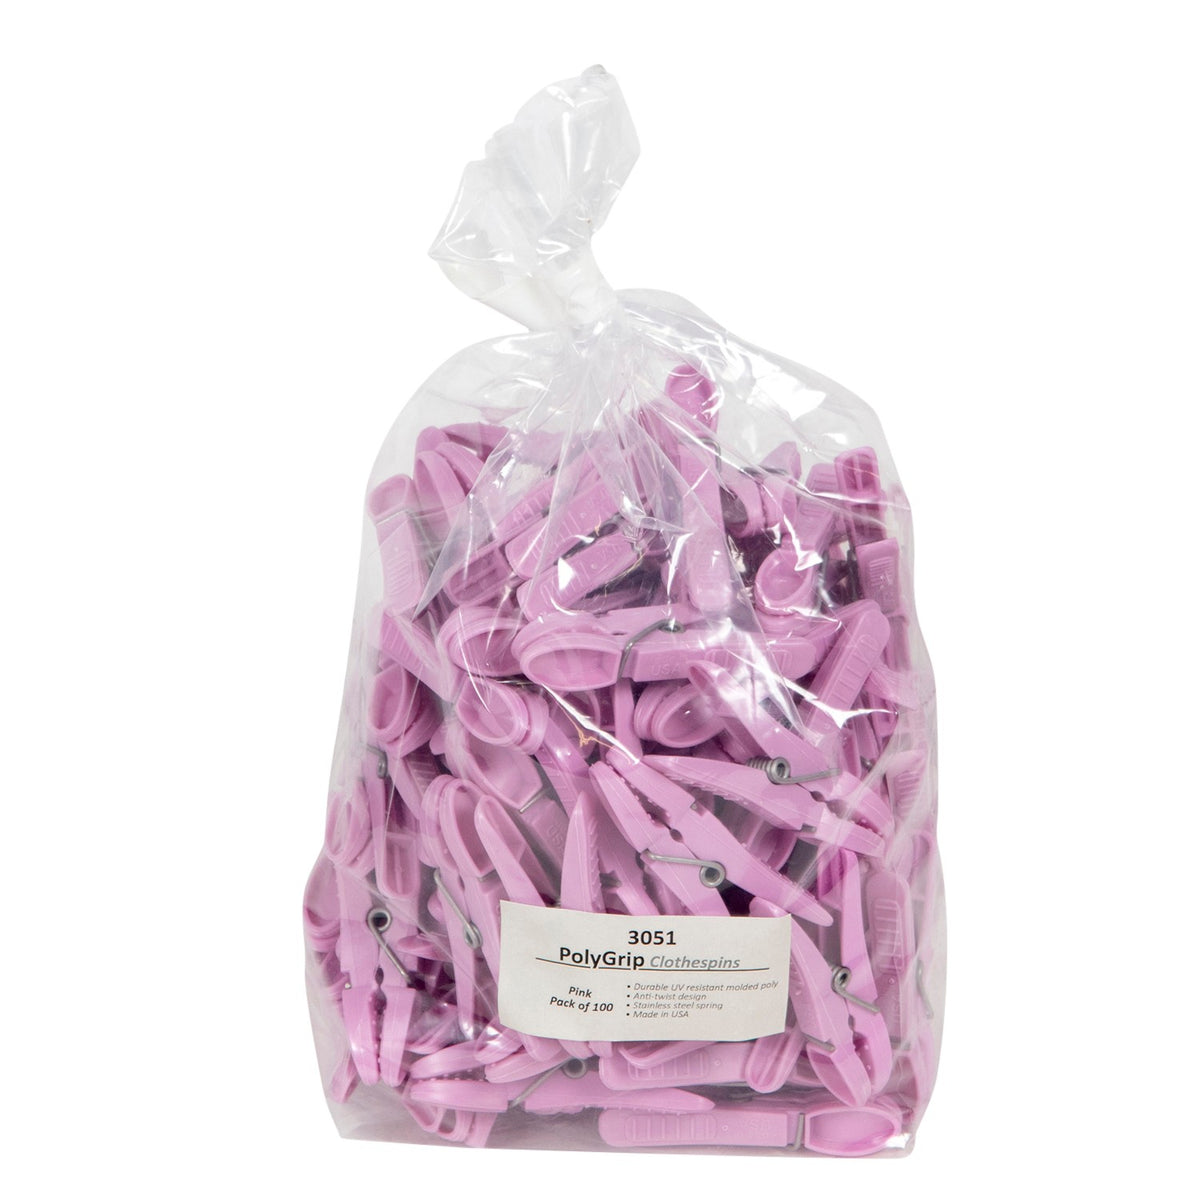 Essaware Polygrip Clothespins - Stronger, USA Made, Anti Twist (100 Pack) ( 1 Color), Size: One size, Pink